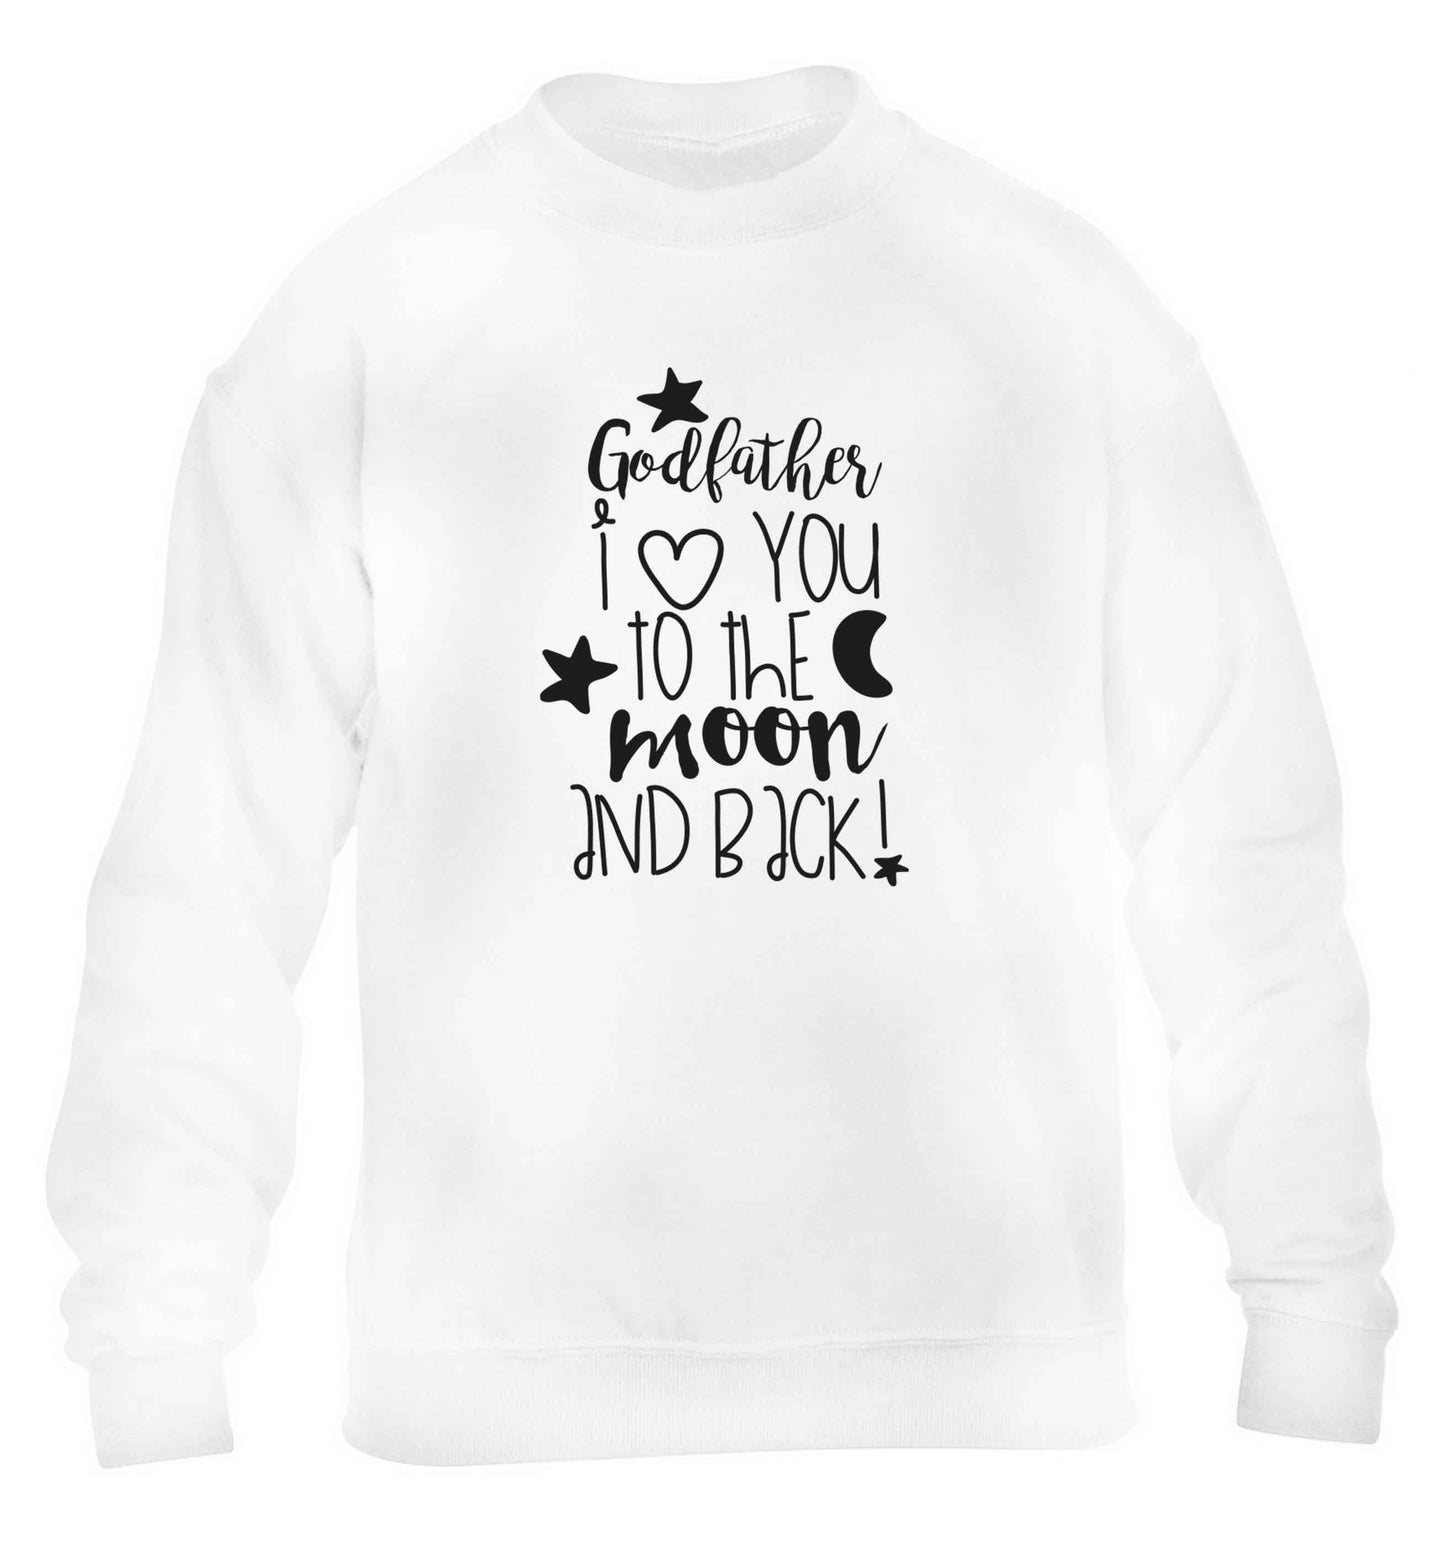 Godfather I love you to the moon and back children's white sweater 12-13 Years